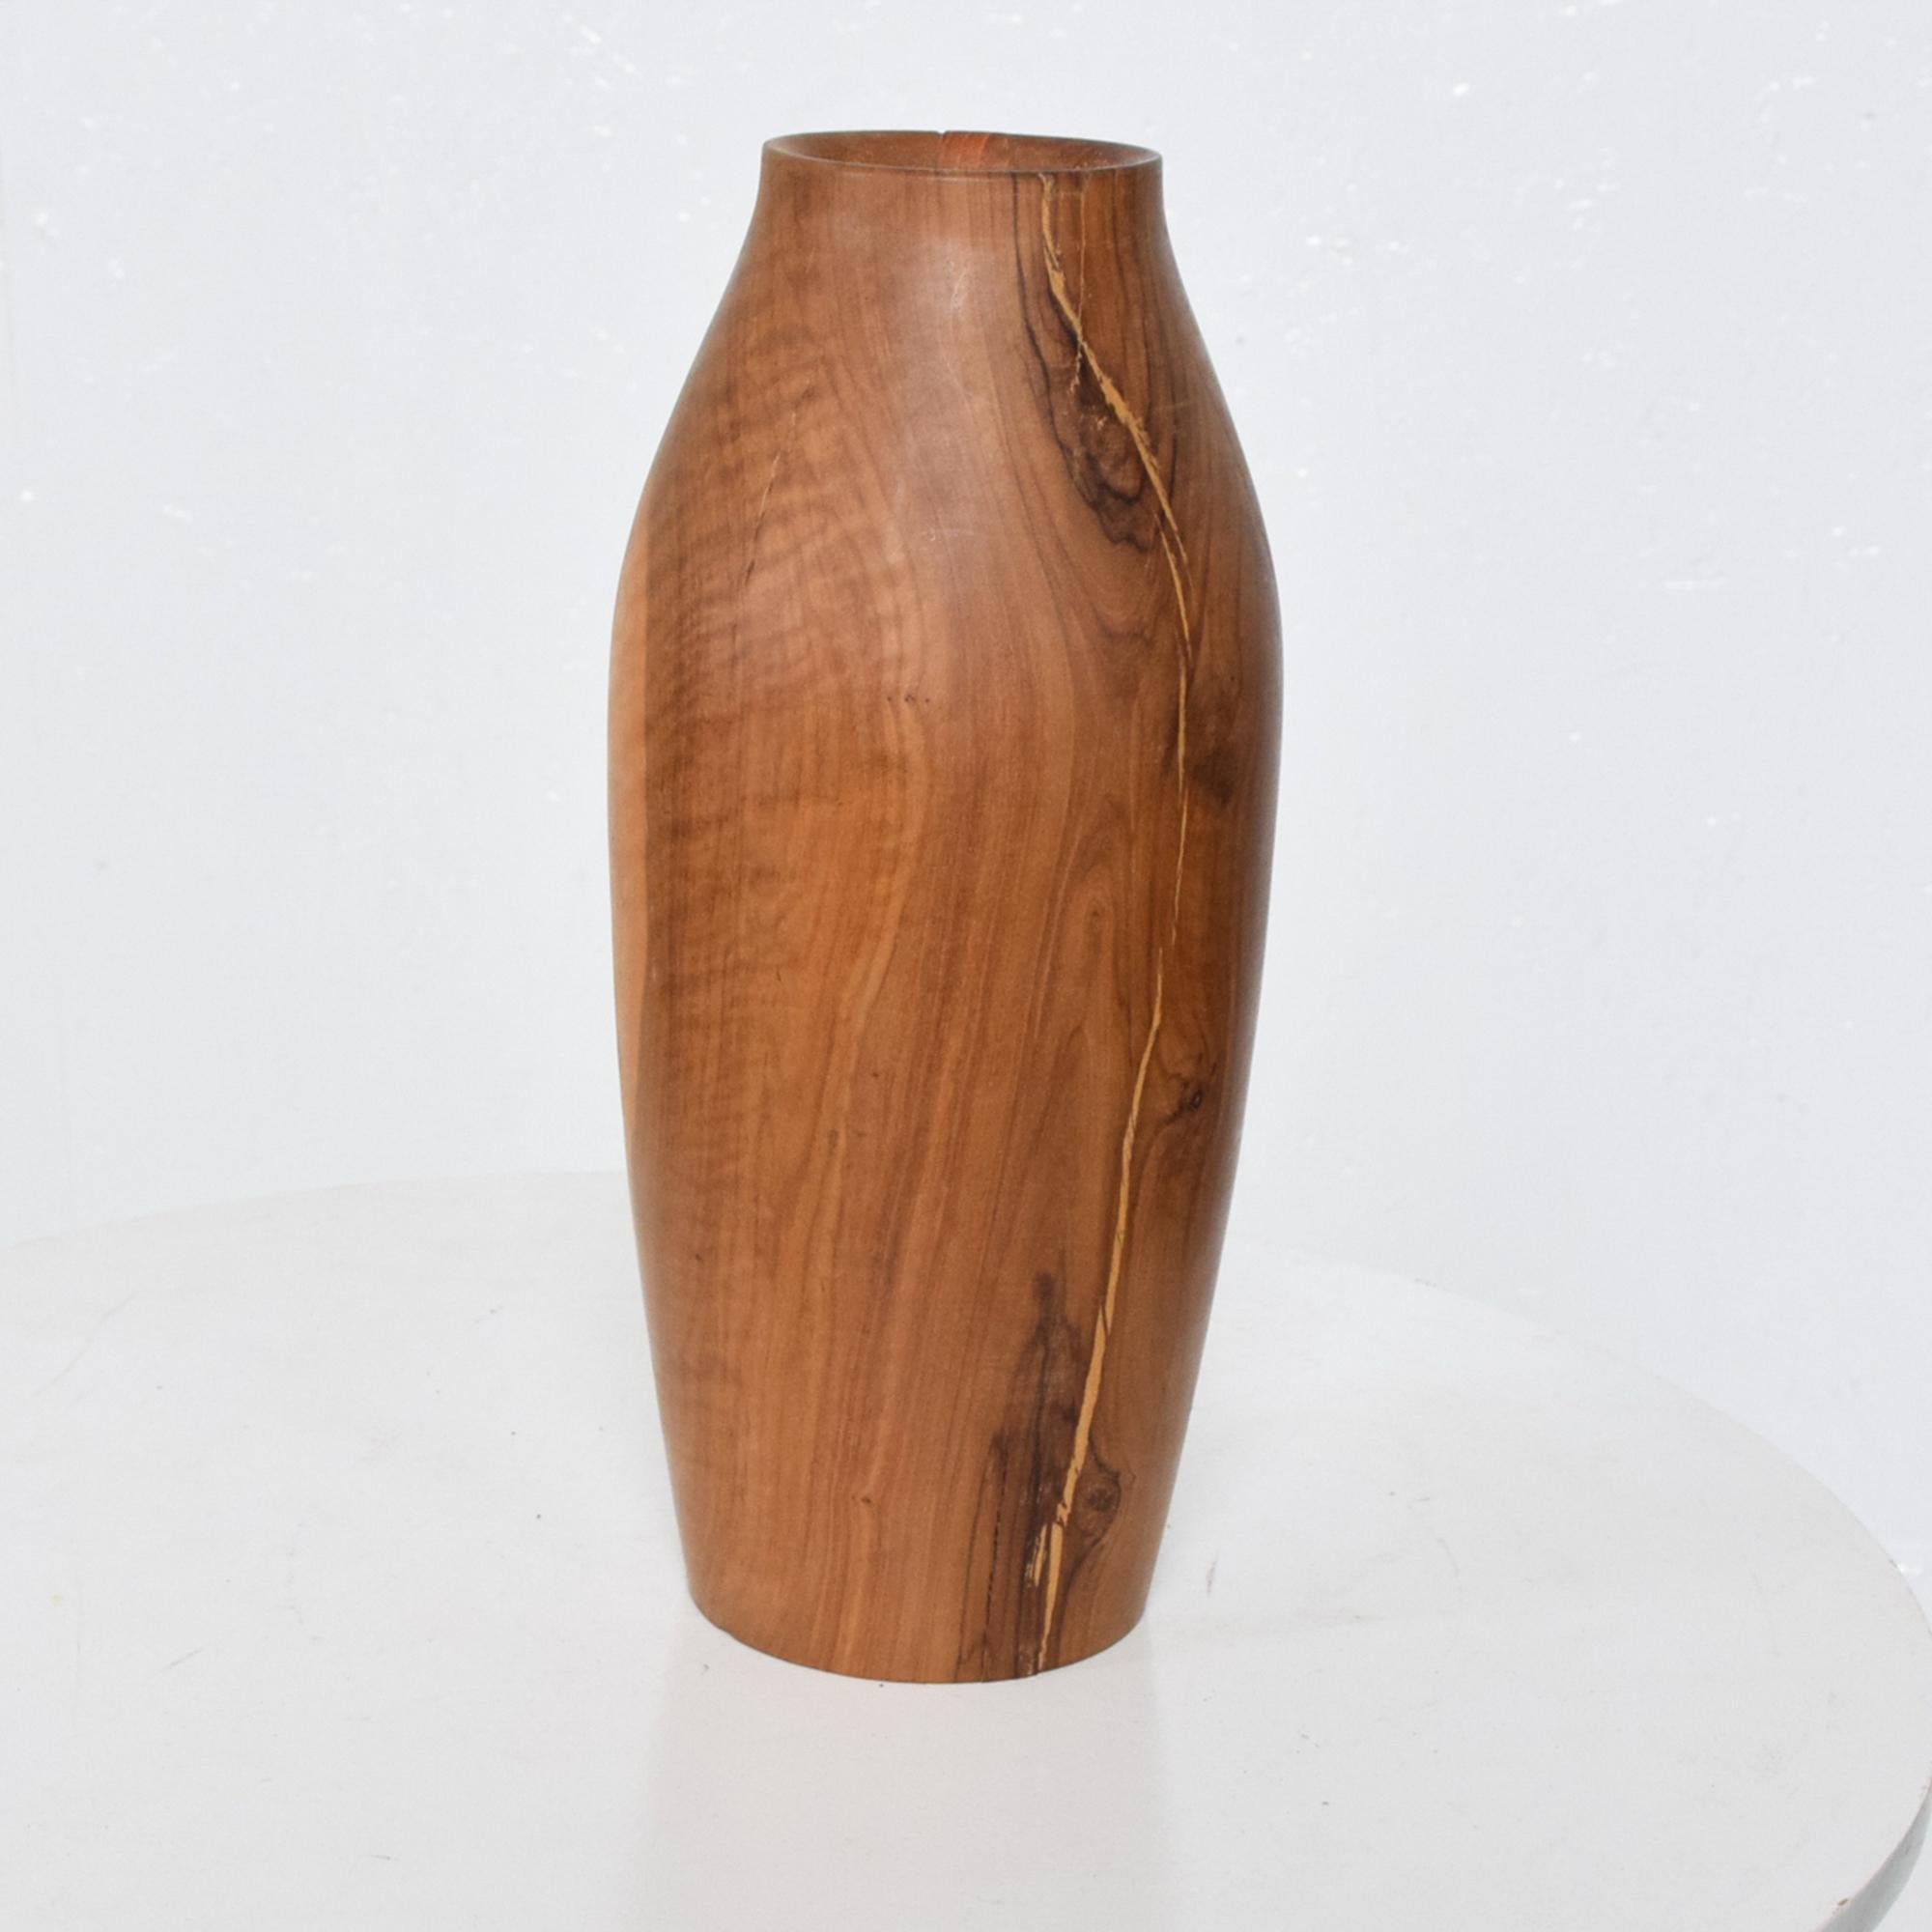 Late 20th Century California Organic Modern Sculptural Turned Wood Vase After Rude Osolnik, 1970s